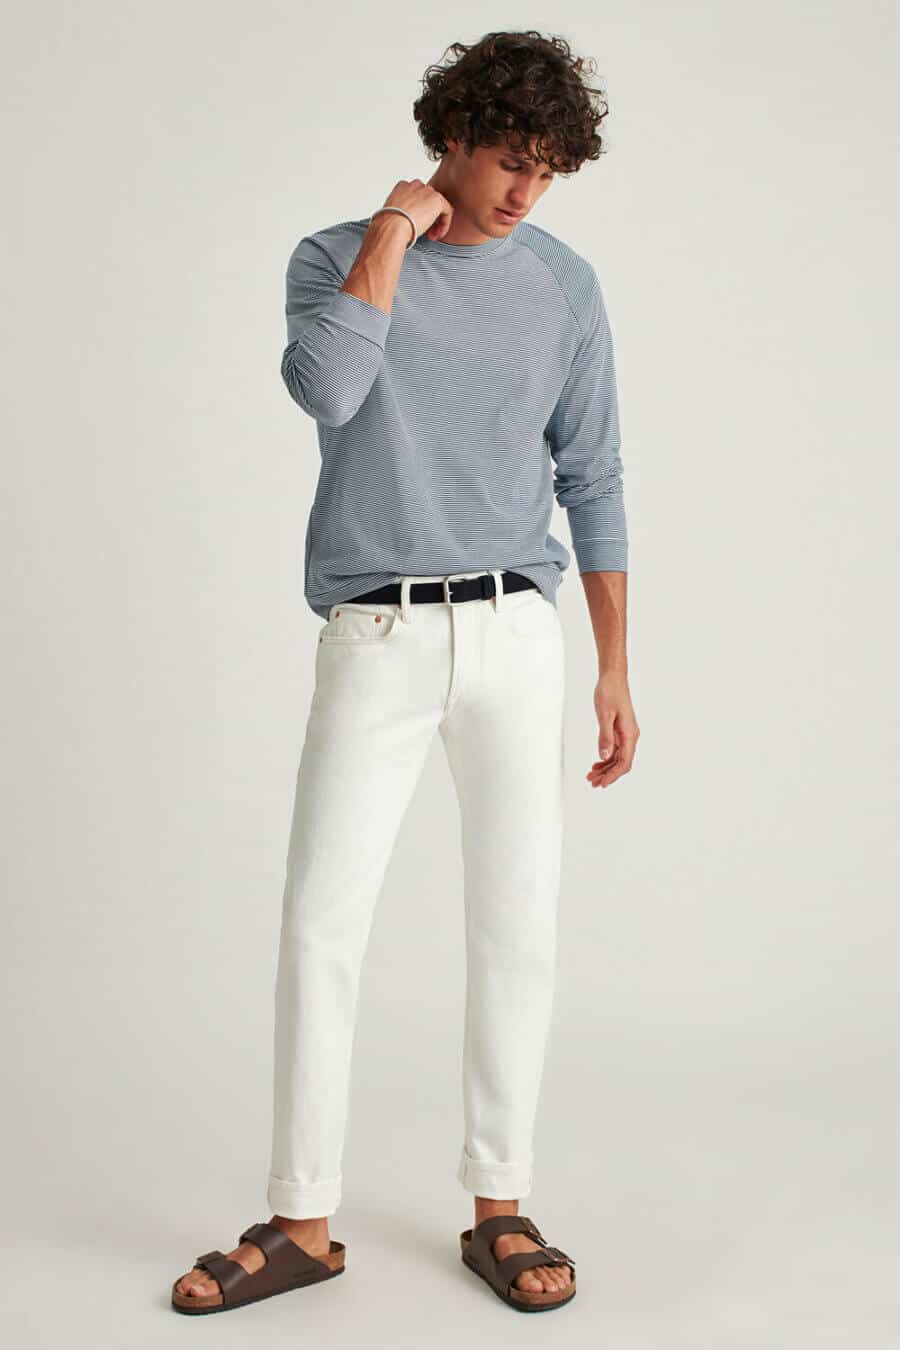 Men's white jeans with top and brown leather sandals outfit